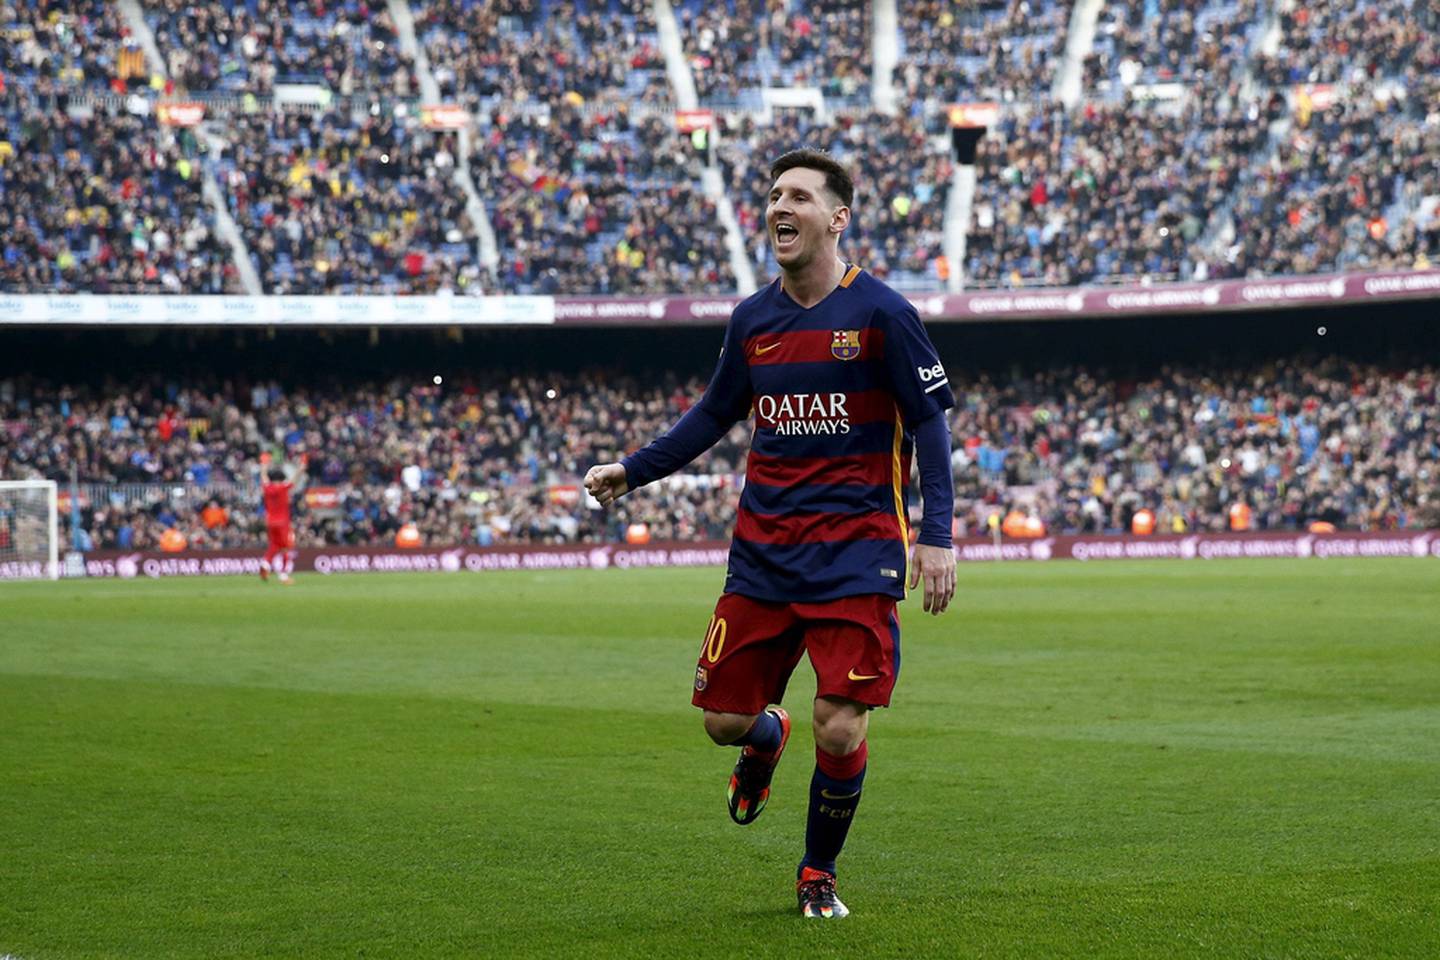 Lionel Messi was a huge draw at Camp Nou. Reuters